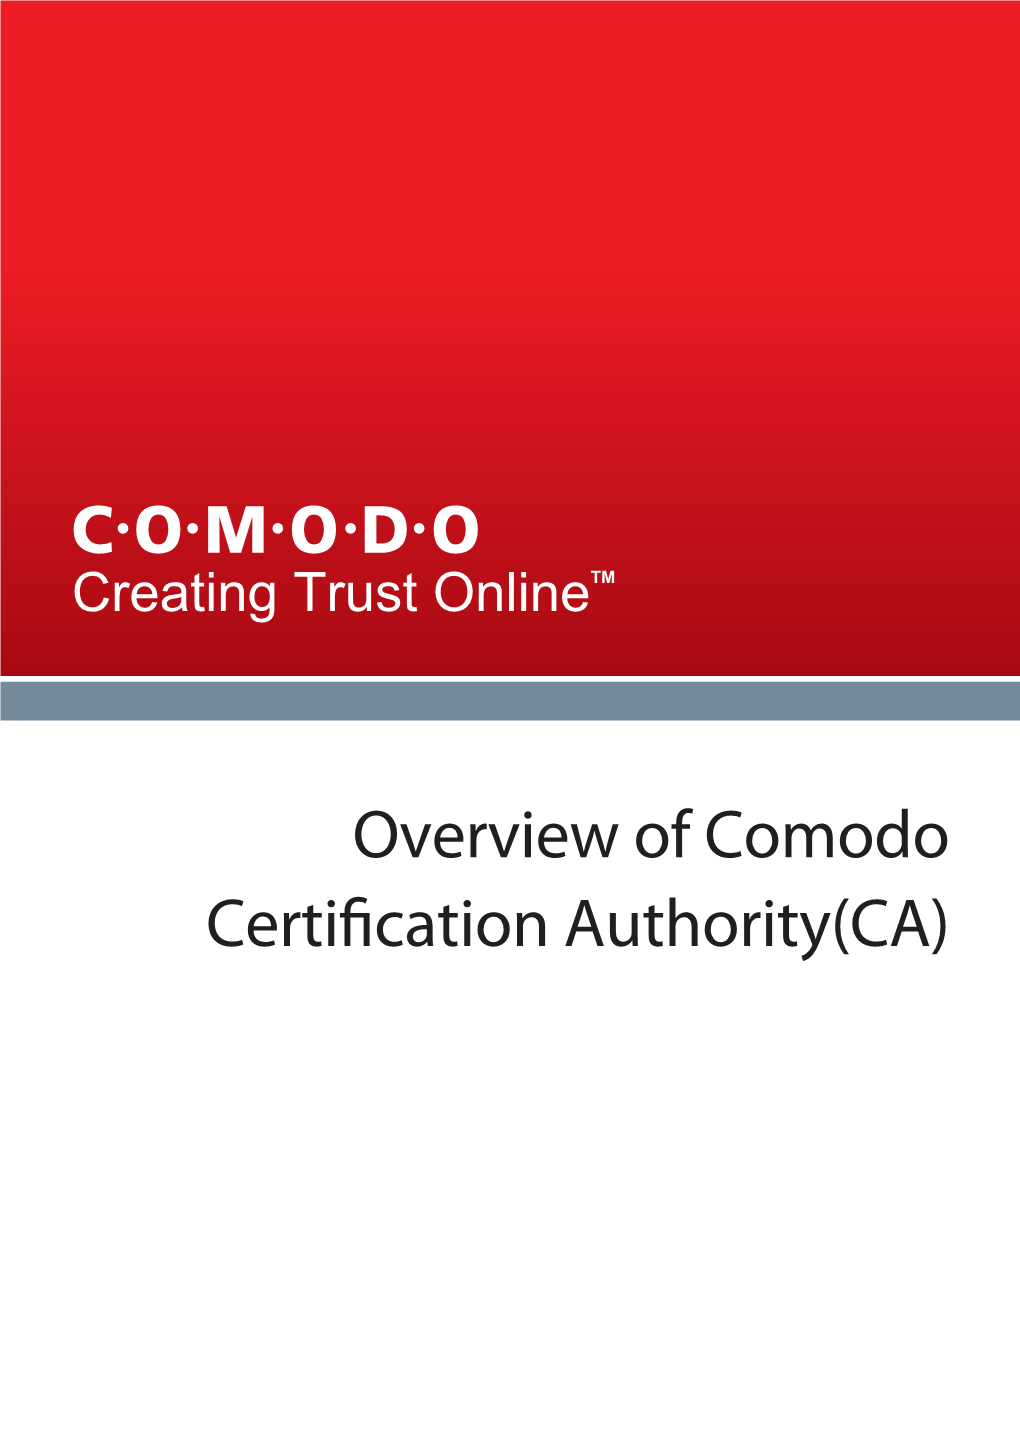 Overview of Comodo Certification Authority(CA)